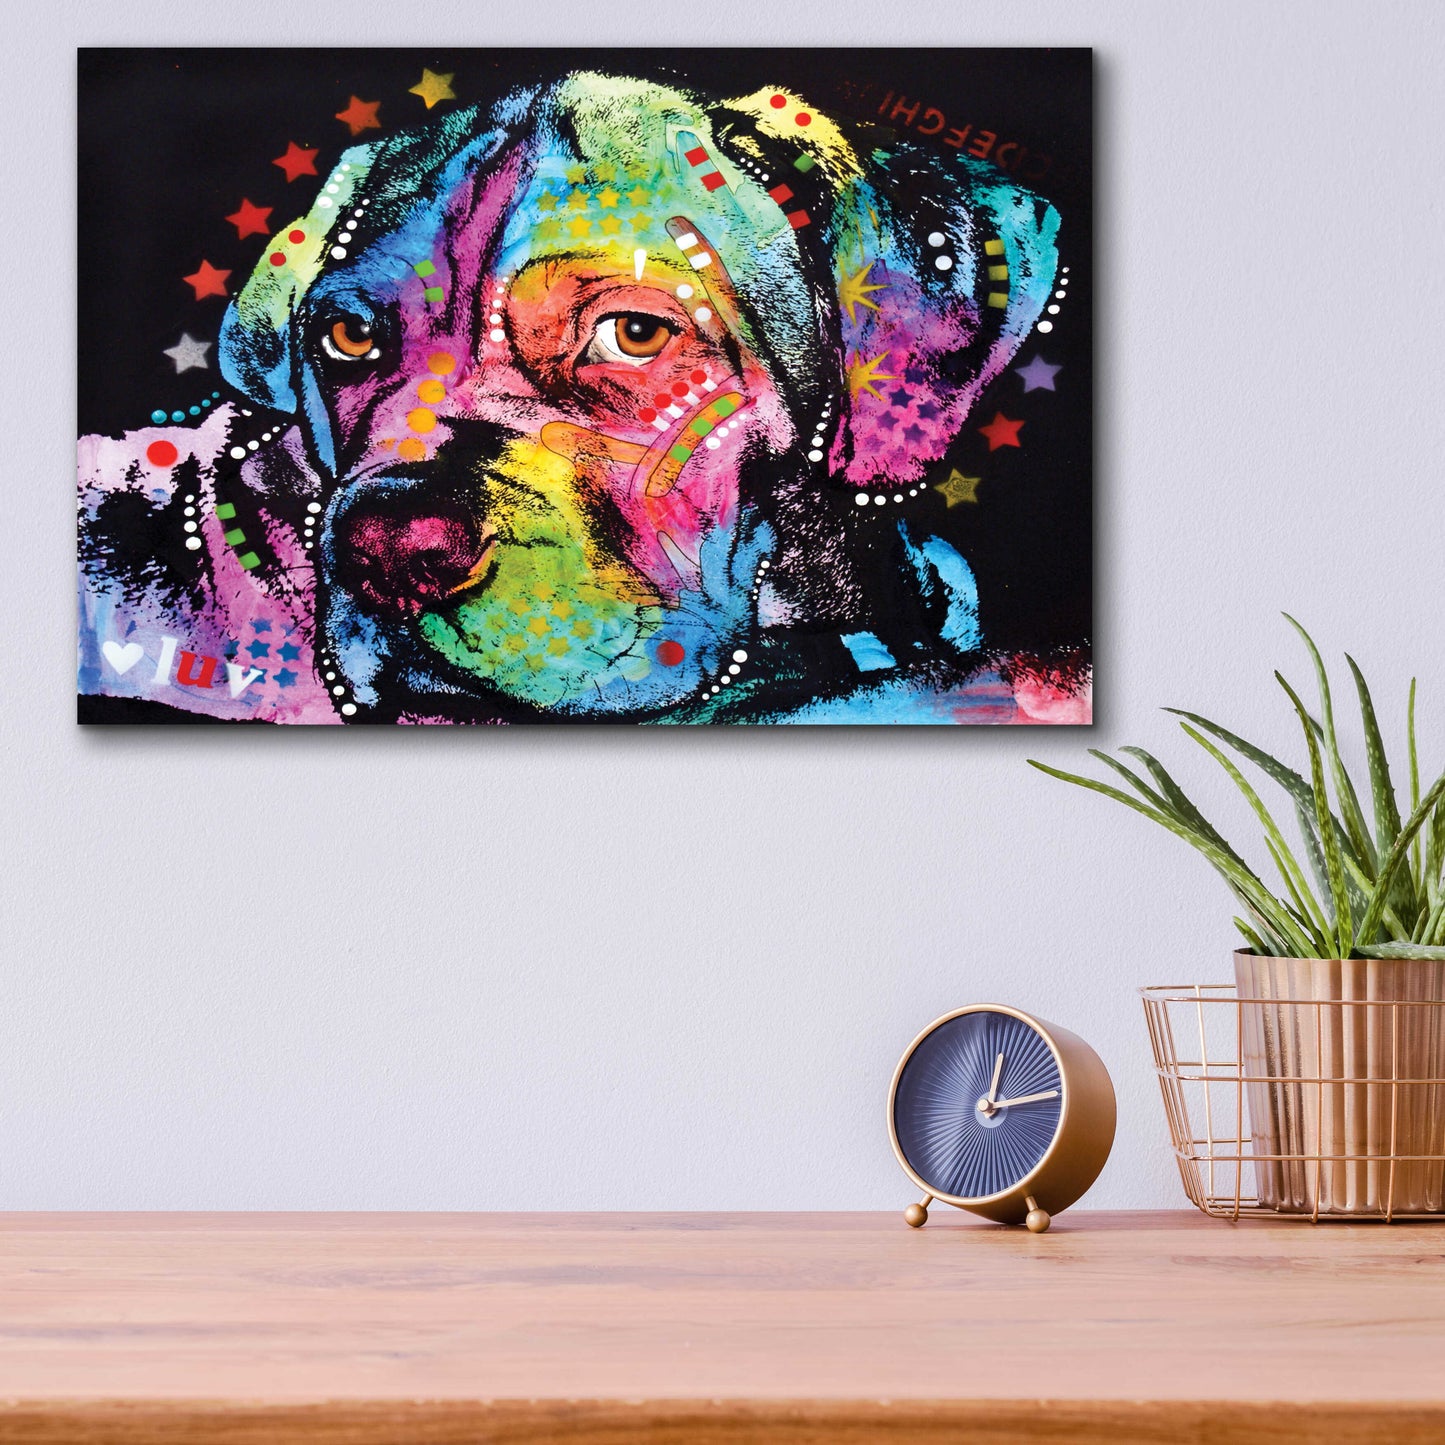 Epic Art 'Young Mastiff' by Dean Russo, Acrylic Glass Wall Art,16x12